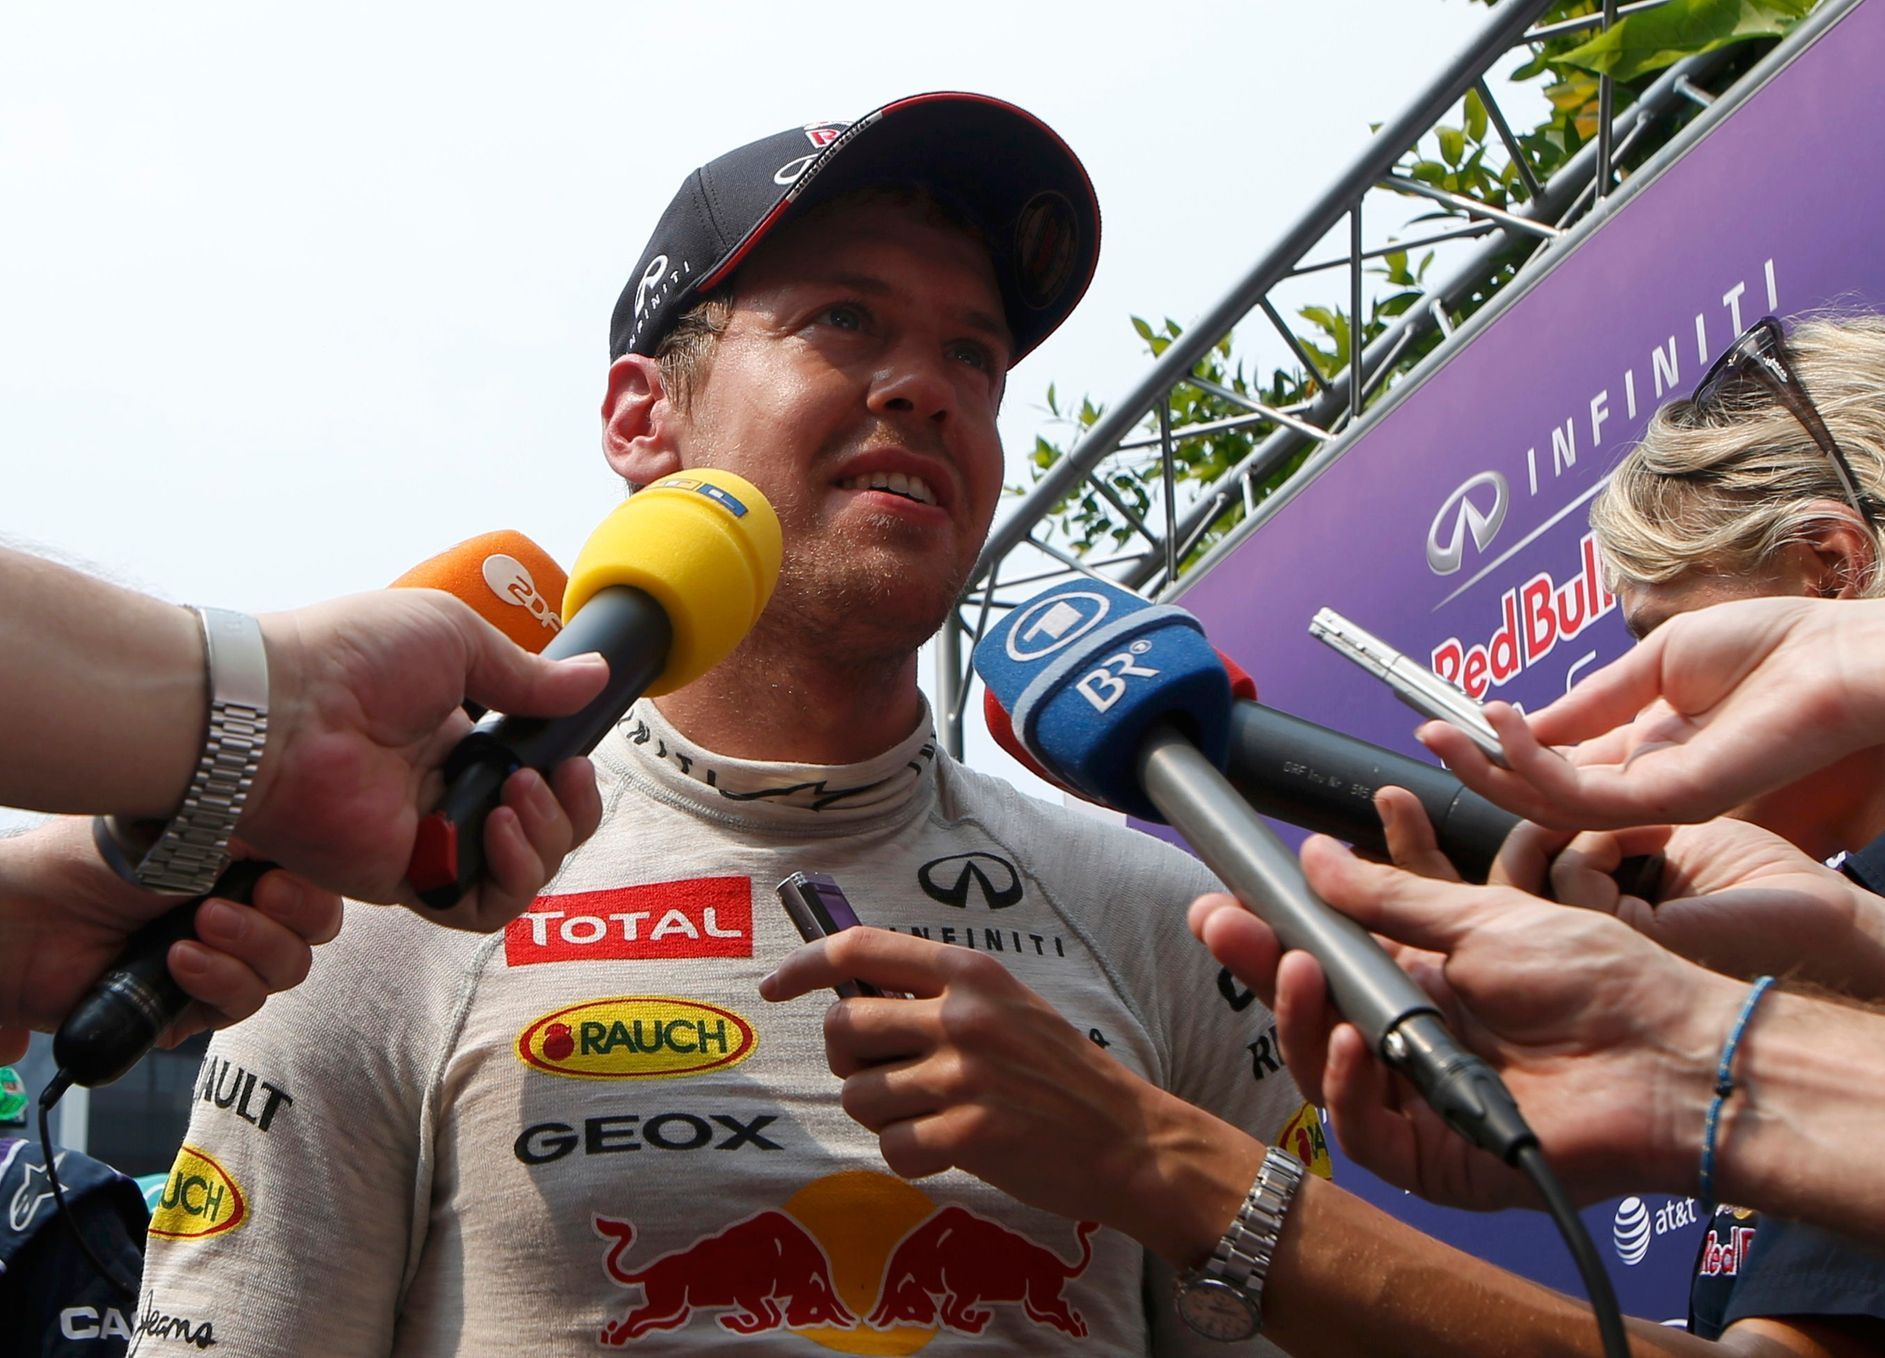 Red Bull Formula One driver Vettel talks to the media after the second practice session of the Malaysian F1 Grand Prix at Sepang International Circuit outside Kuala Lumpur